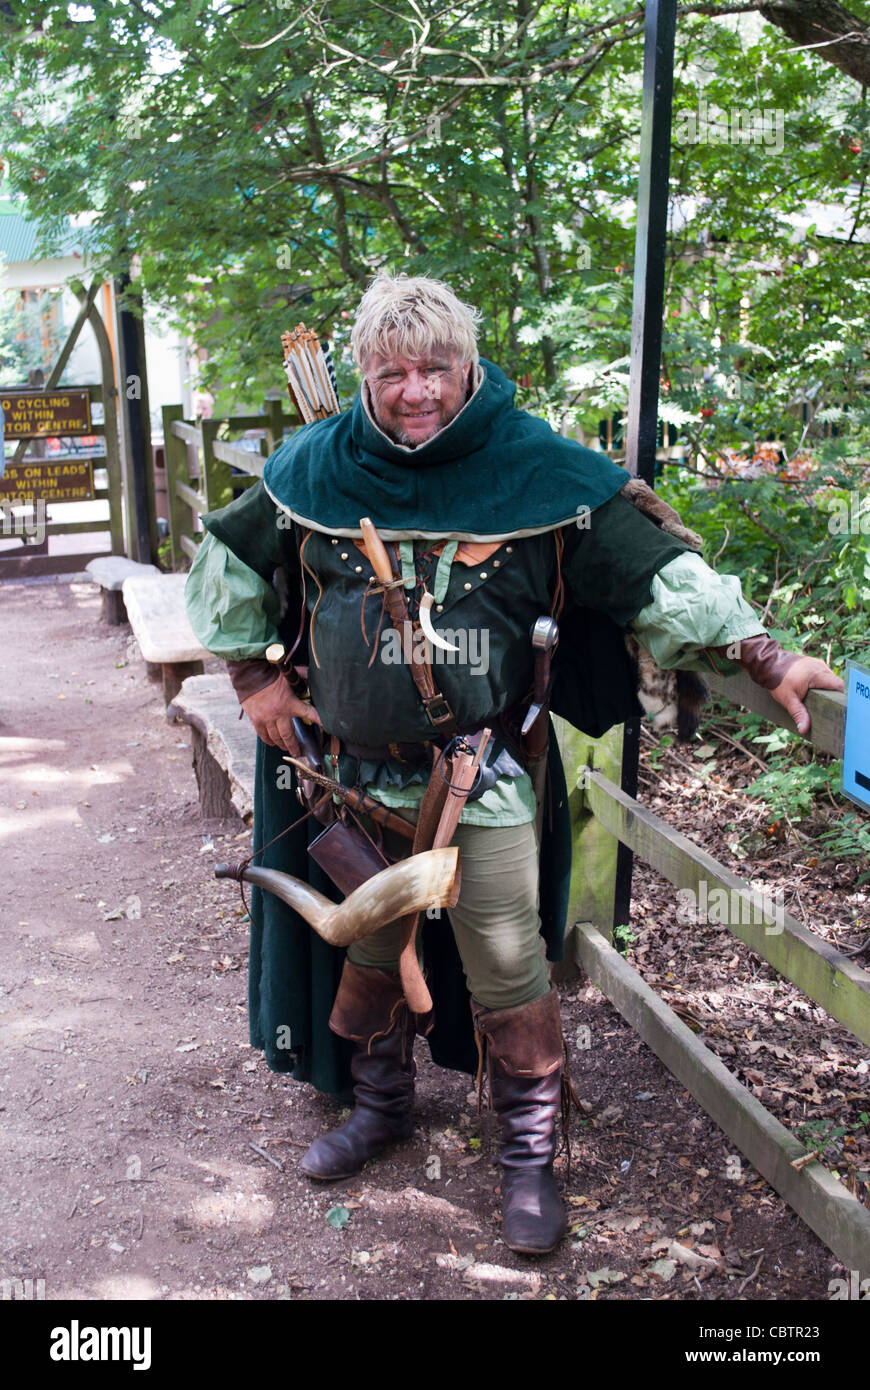 Large man dressed as one of Robin Hood's merry men with bow and arrows and hunting horn leaning on fence with trees behind Stock Photo